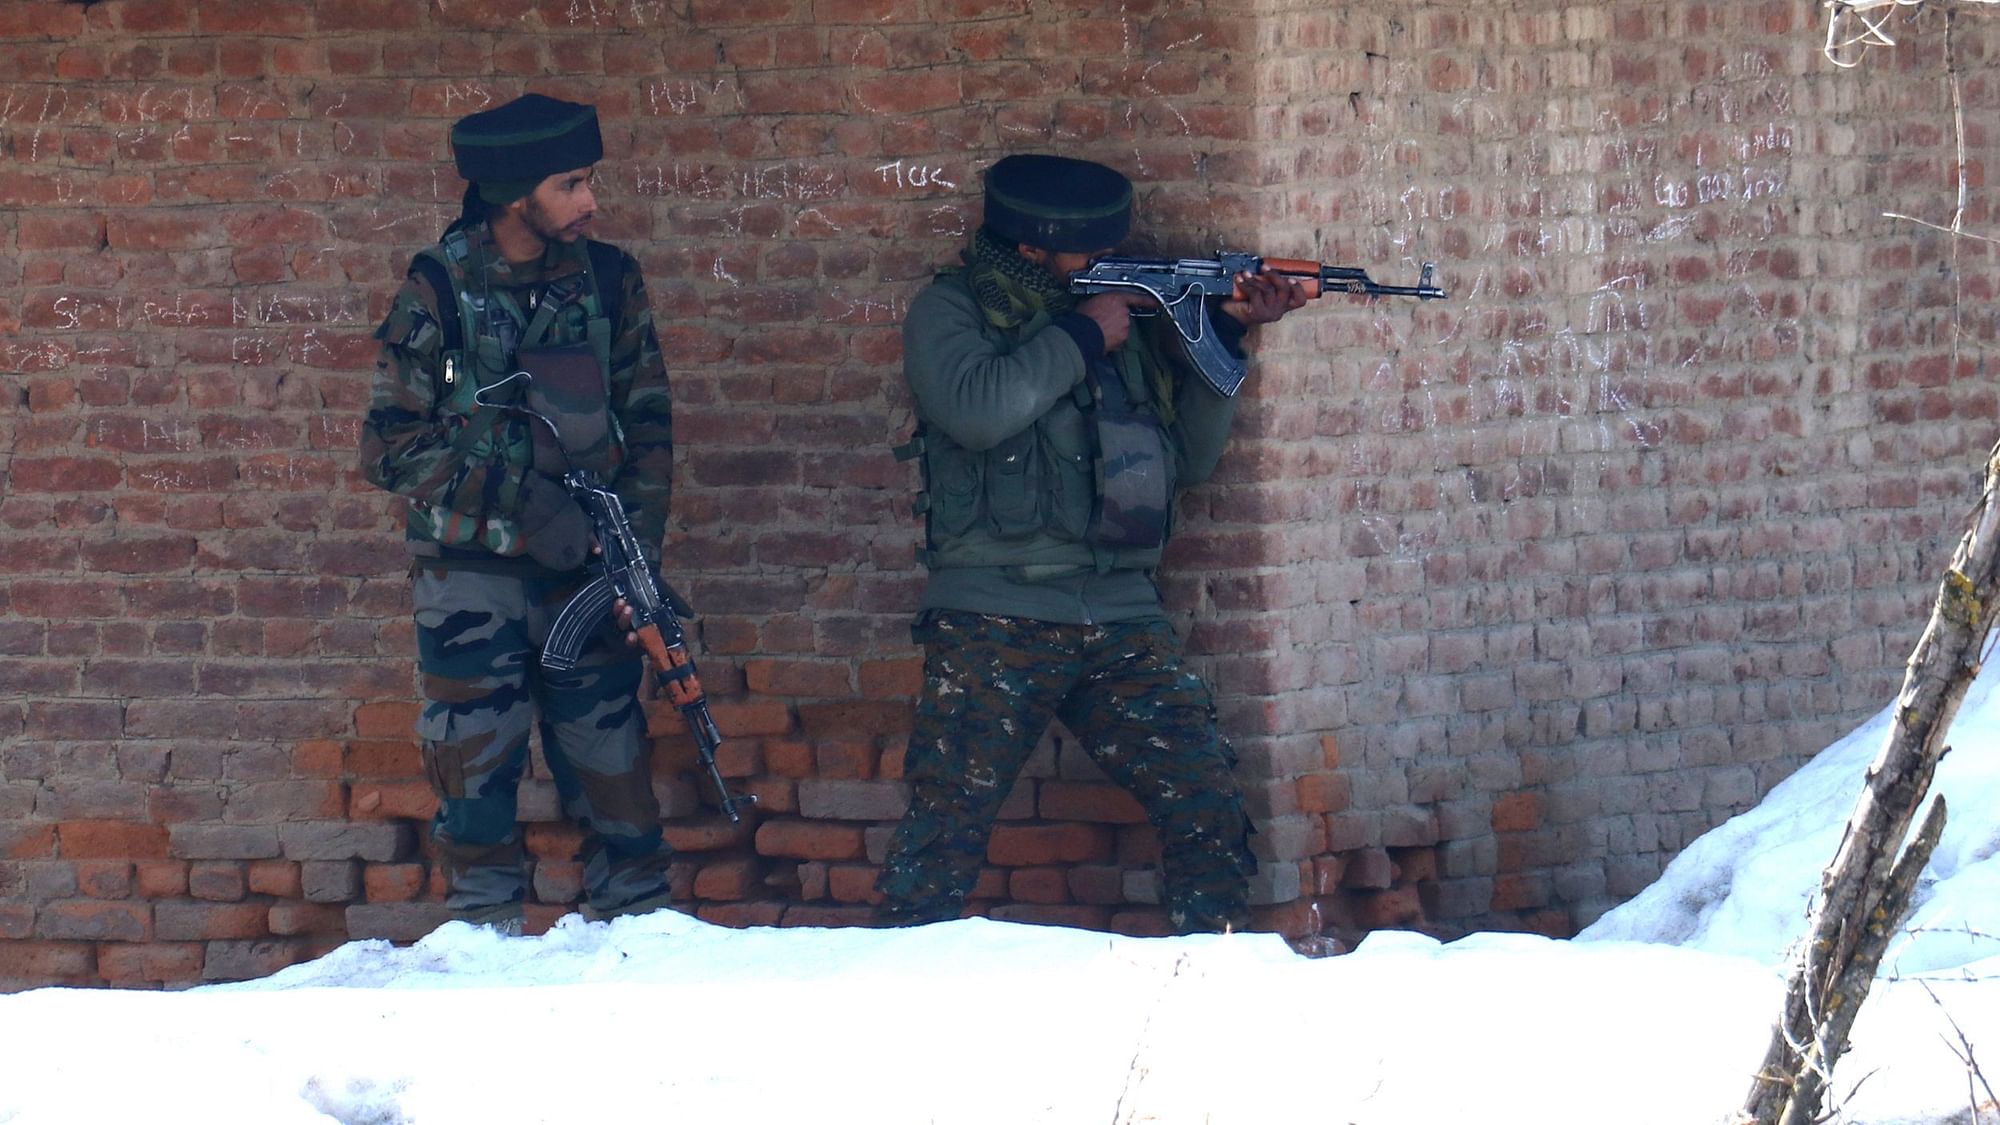 In what seems to be back-to-back operations launched on Thursday night, jointly carried out by the Army, police and the Central Reserve Police Force (CRPF), three militants were staked out and killed in Badigam area of Shopian.